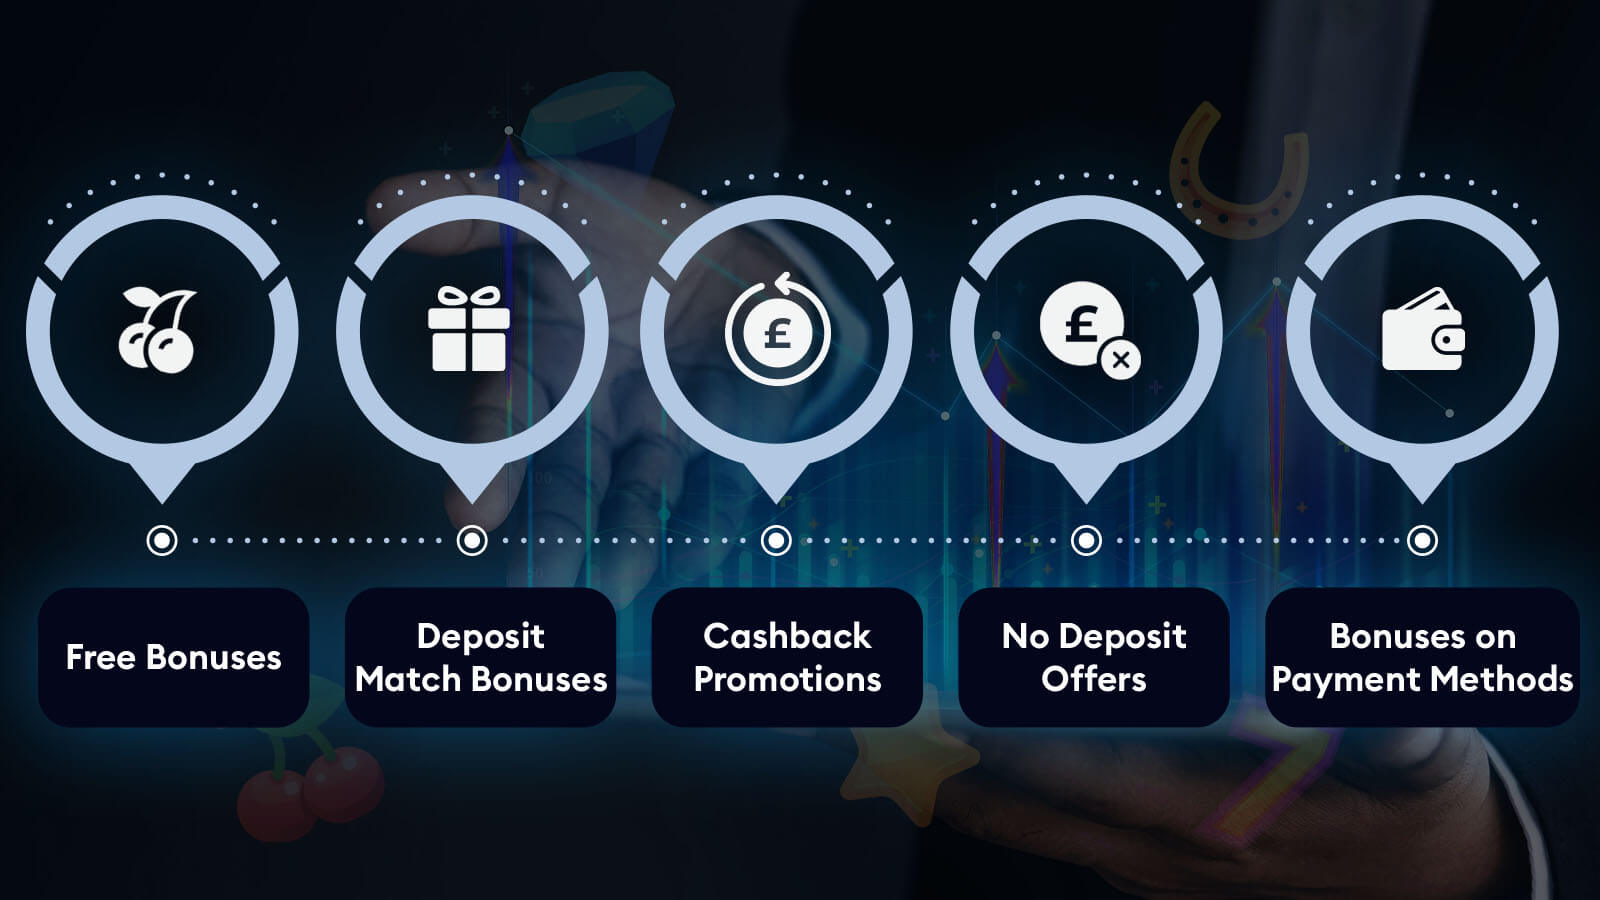 Claiming the Low-Roller Offers Available at UK Online Casinos